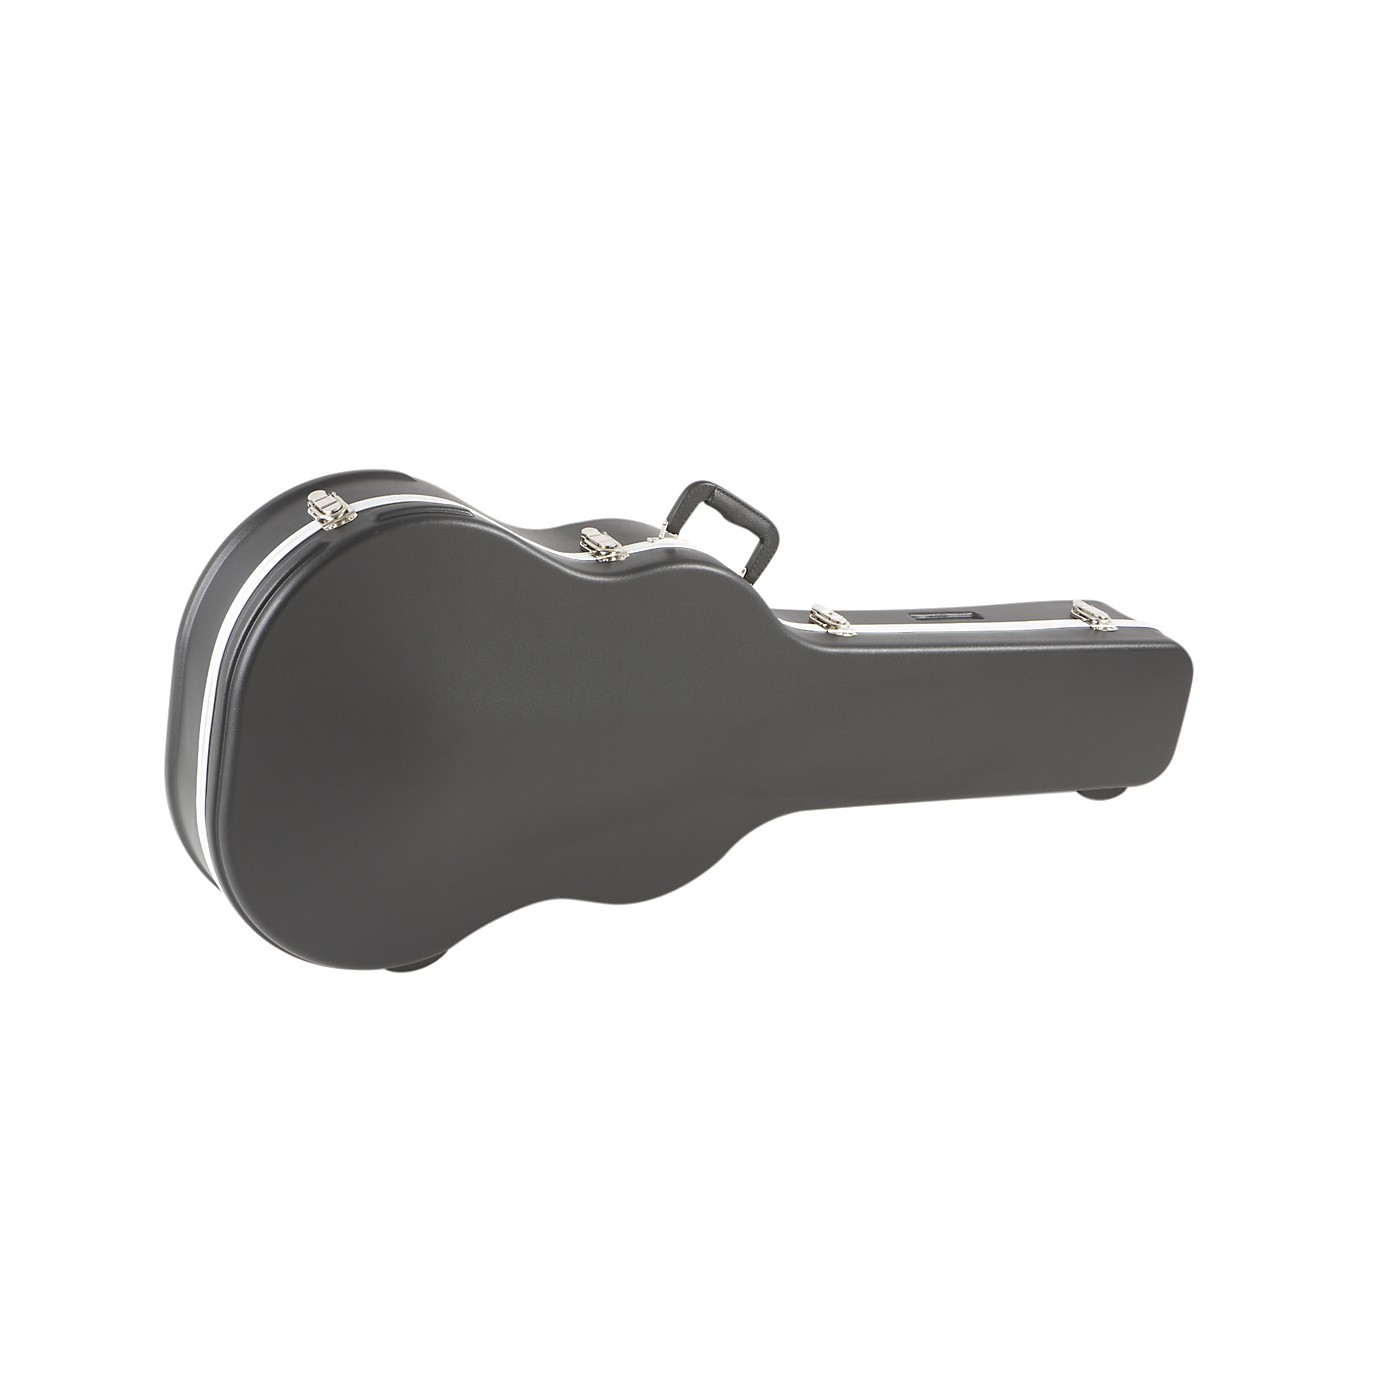 Musician's Gear MGMADN Molded ABS Acoustic Guitar Case thumbnail